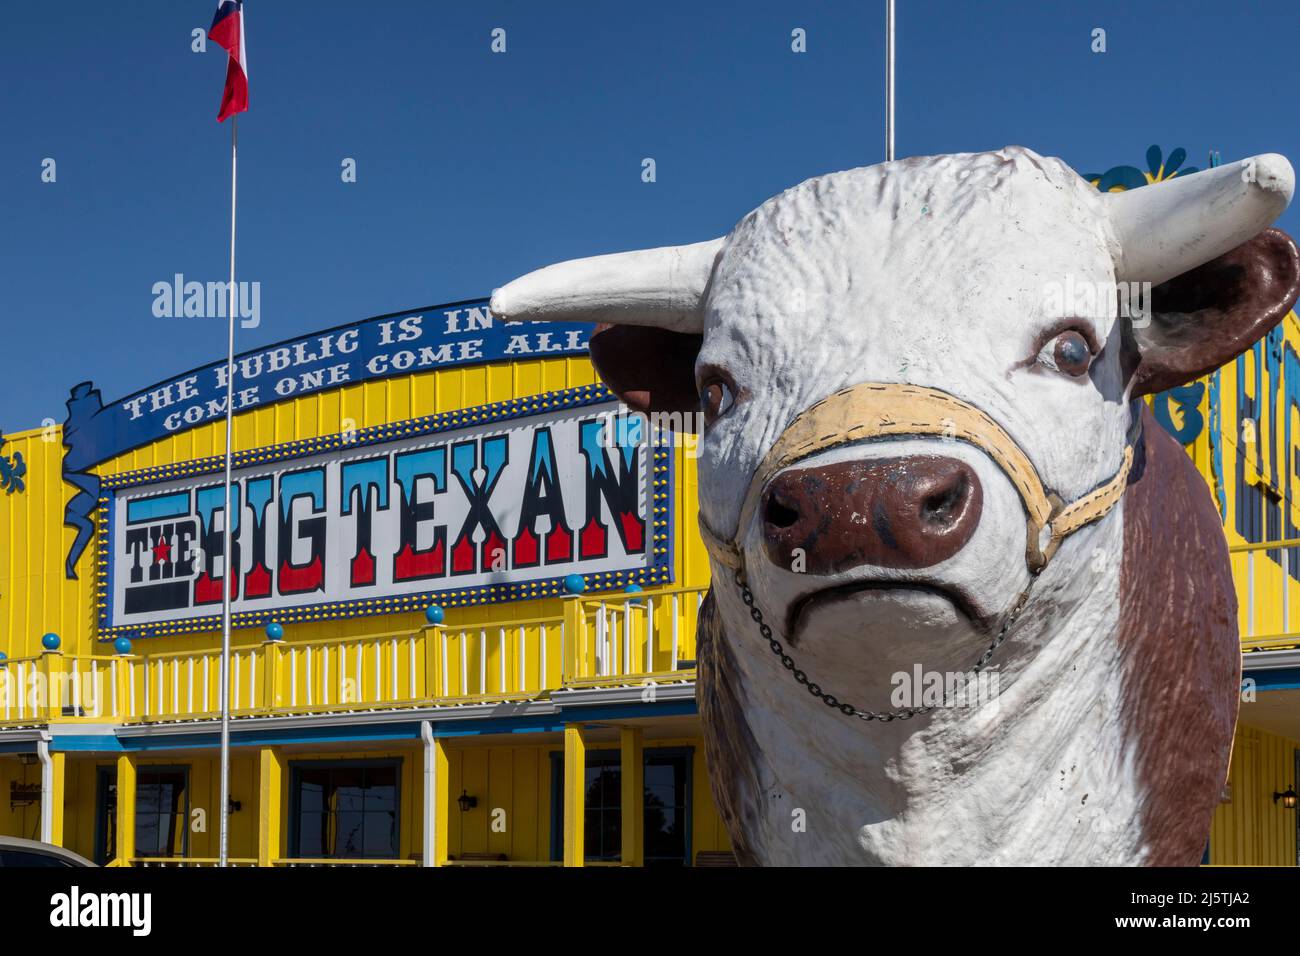 Amarillo, Texas - The Big Texan Steak Ranch. The restaurant offers a free 72-ounce steak to customers who can eat it all, including side dishes, withi Stock Photo